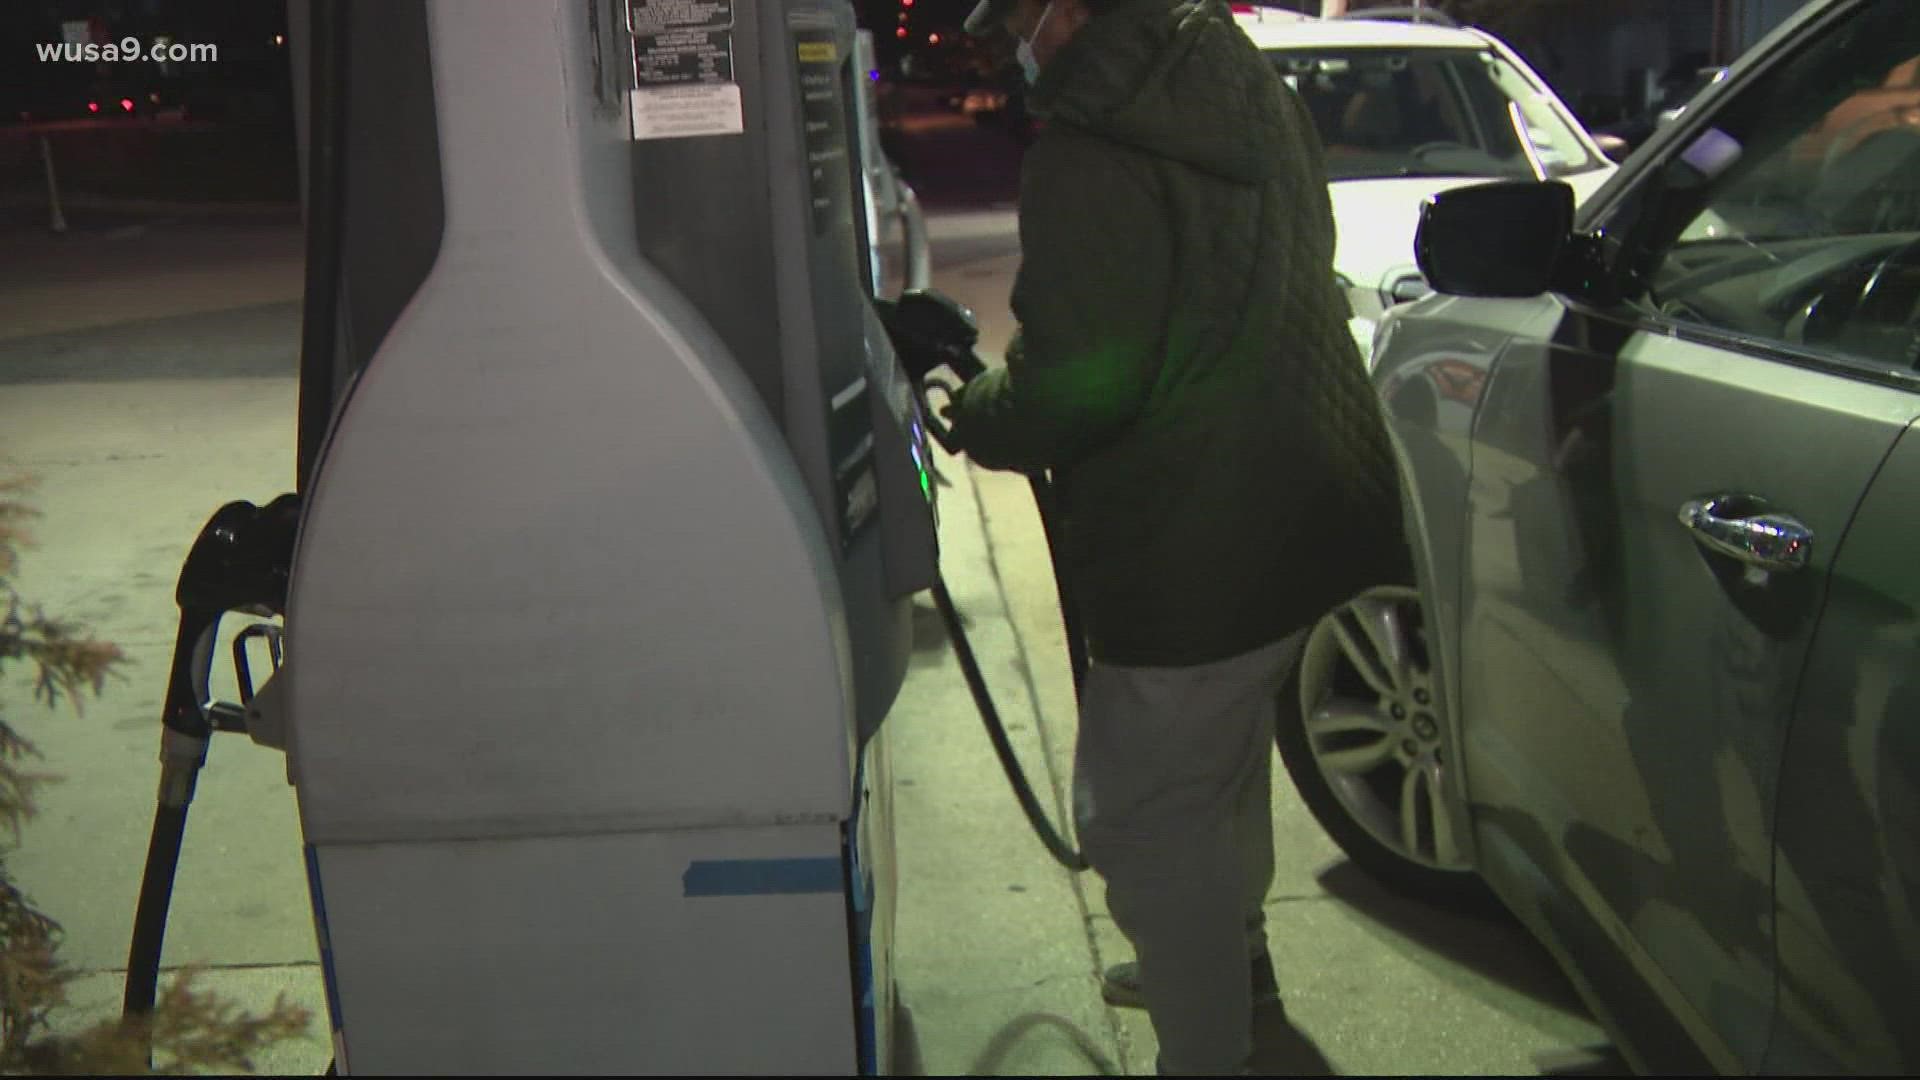 The gas tax holiday would save drivers just over 36 cents per gallon. WUSA9 spoke to Peter Franchot.